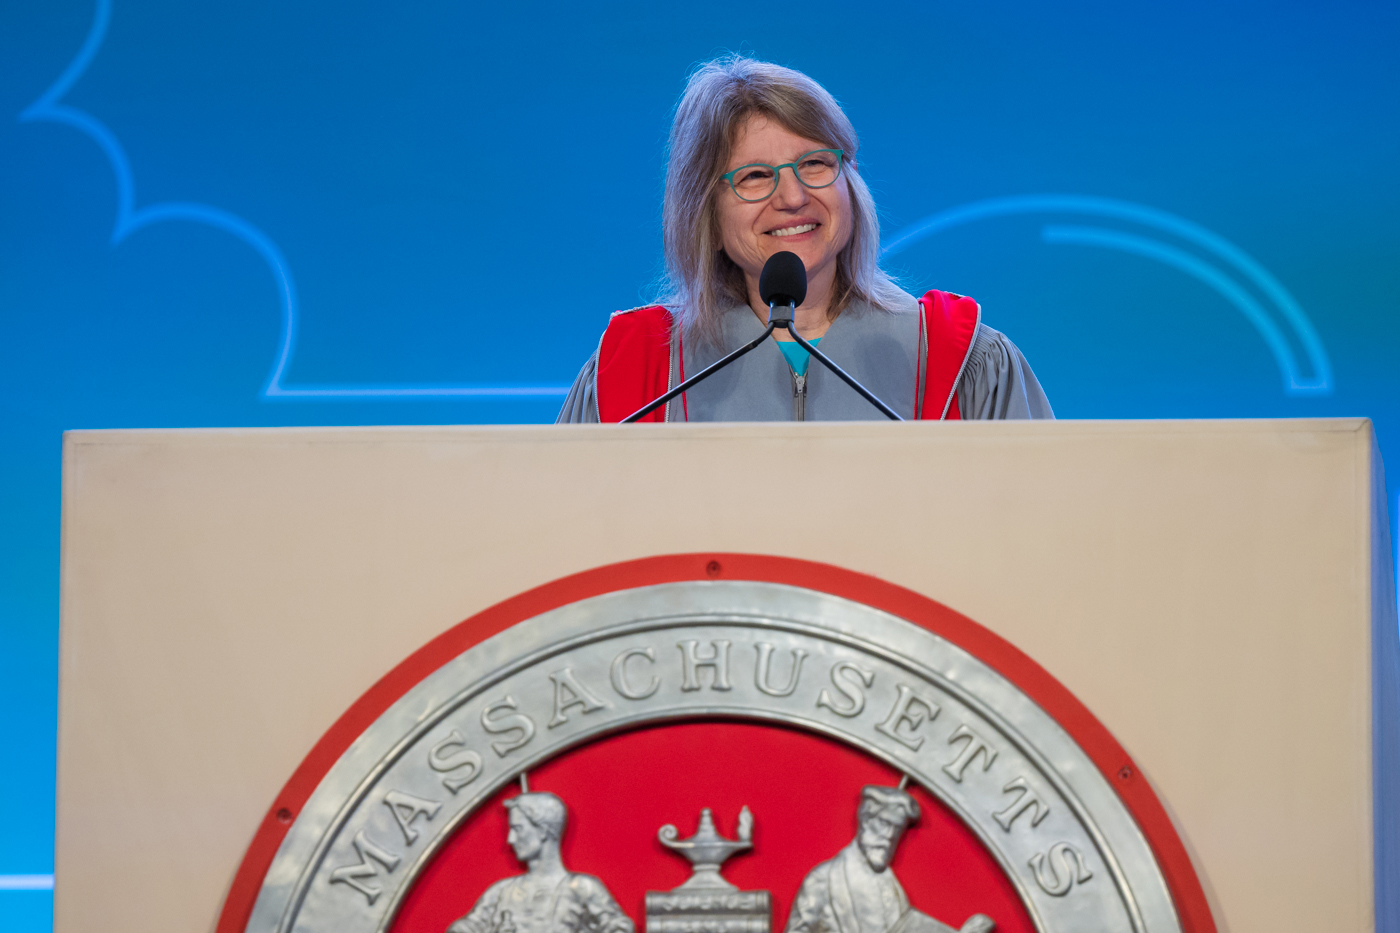 Incoming MIT president Sally Kornbluth wants to lift other women